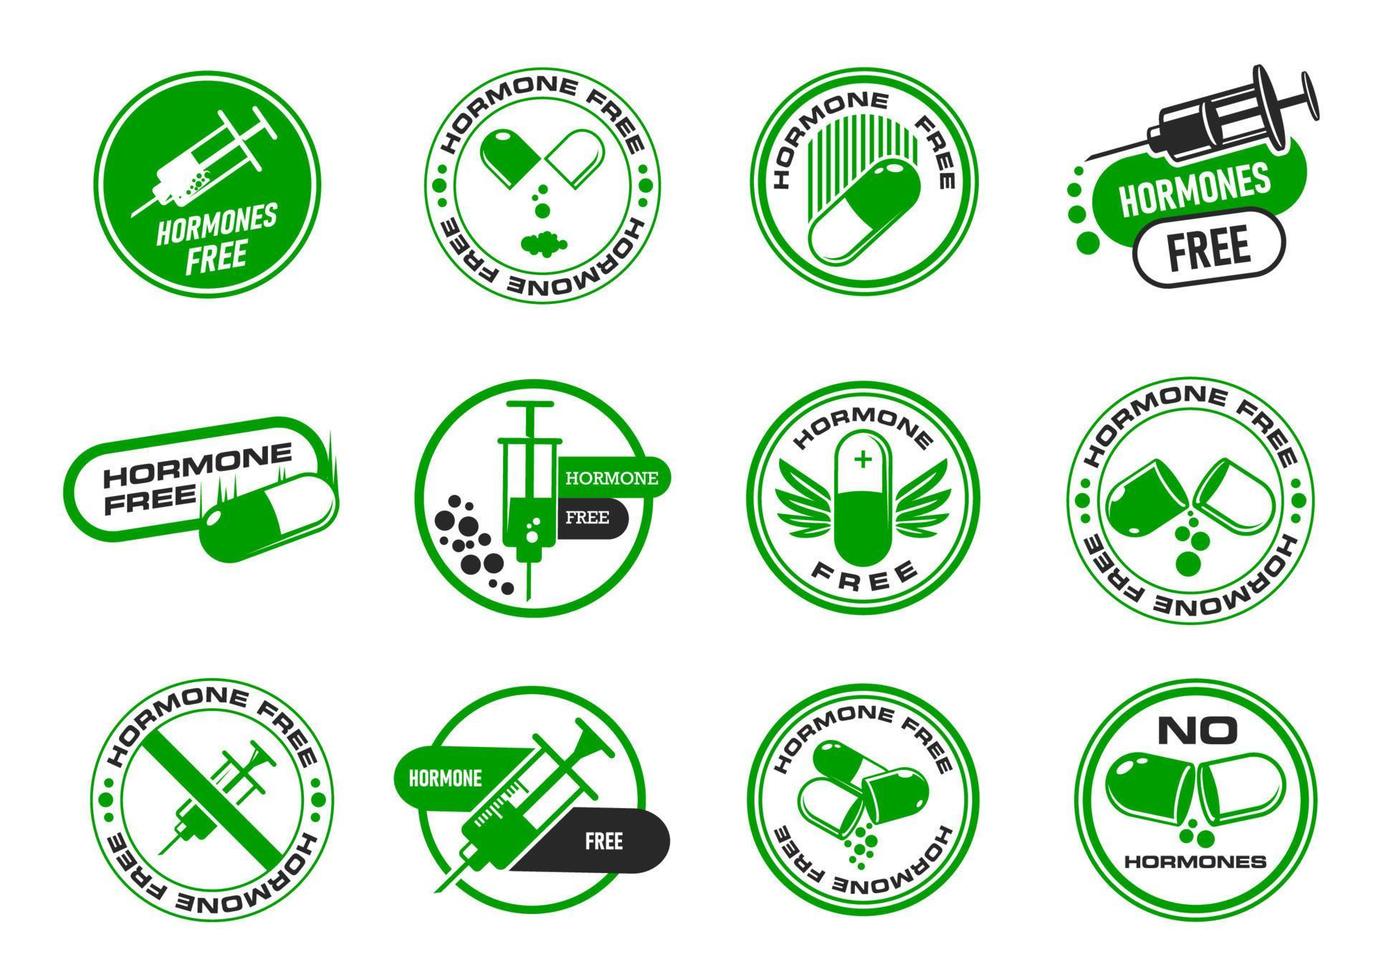 Hormone free icons, healthy organic food stickers vector